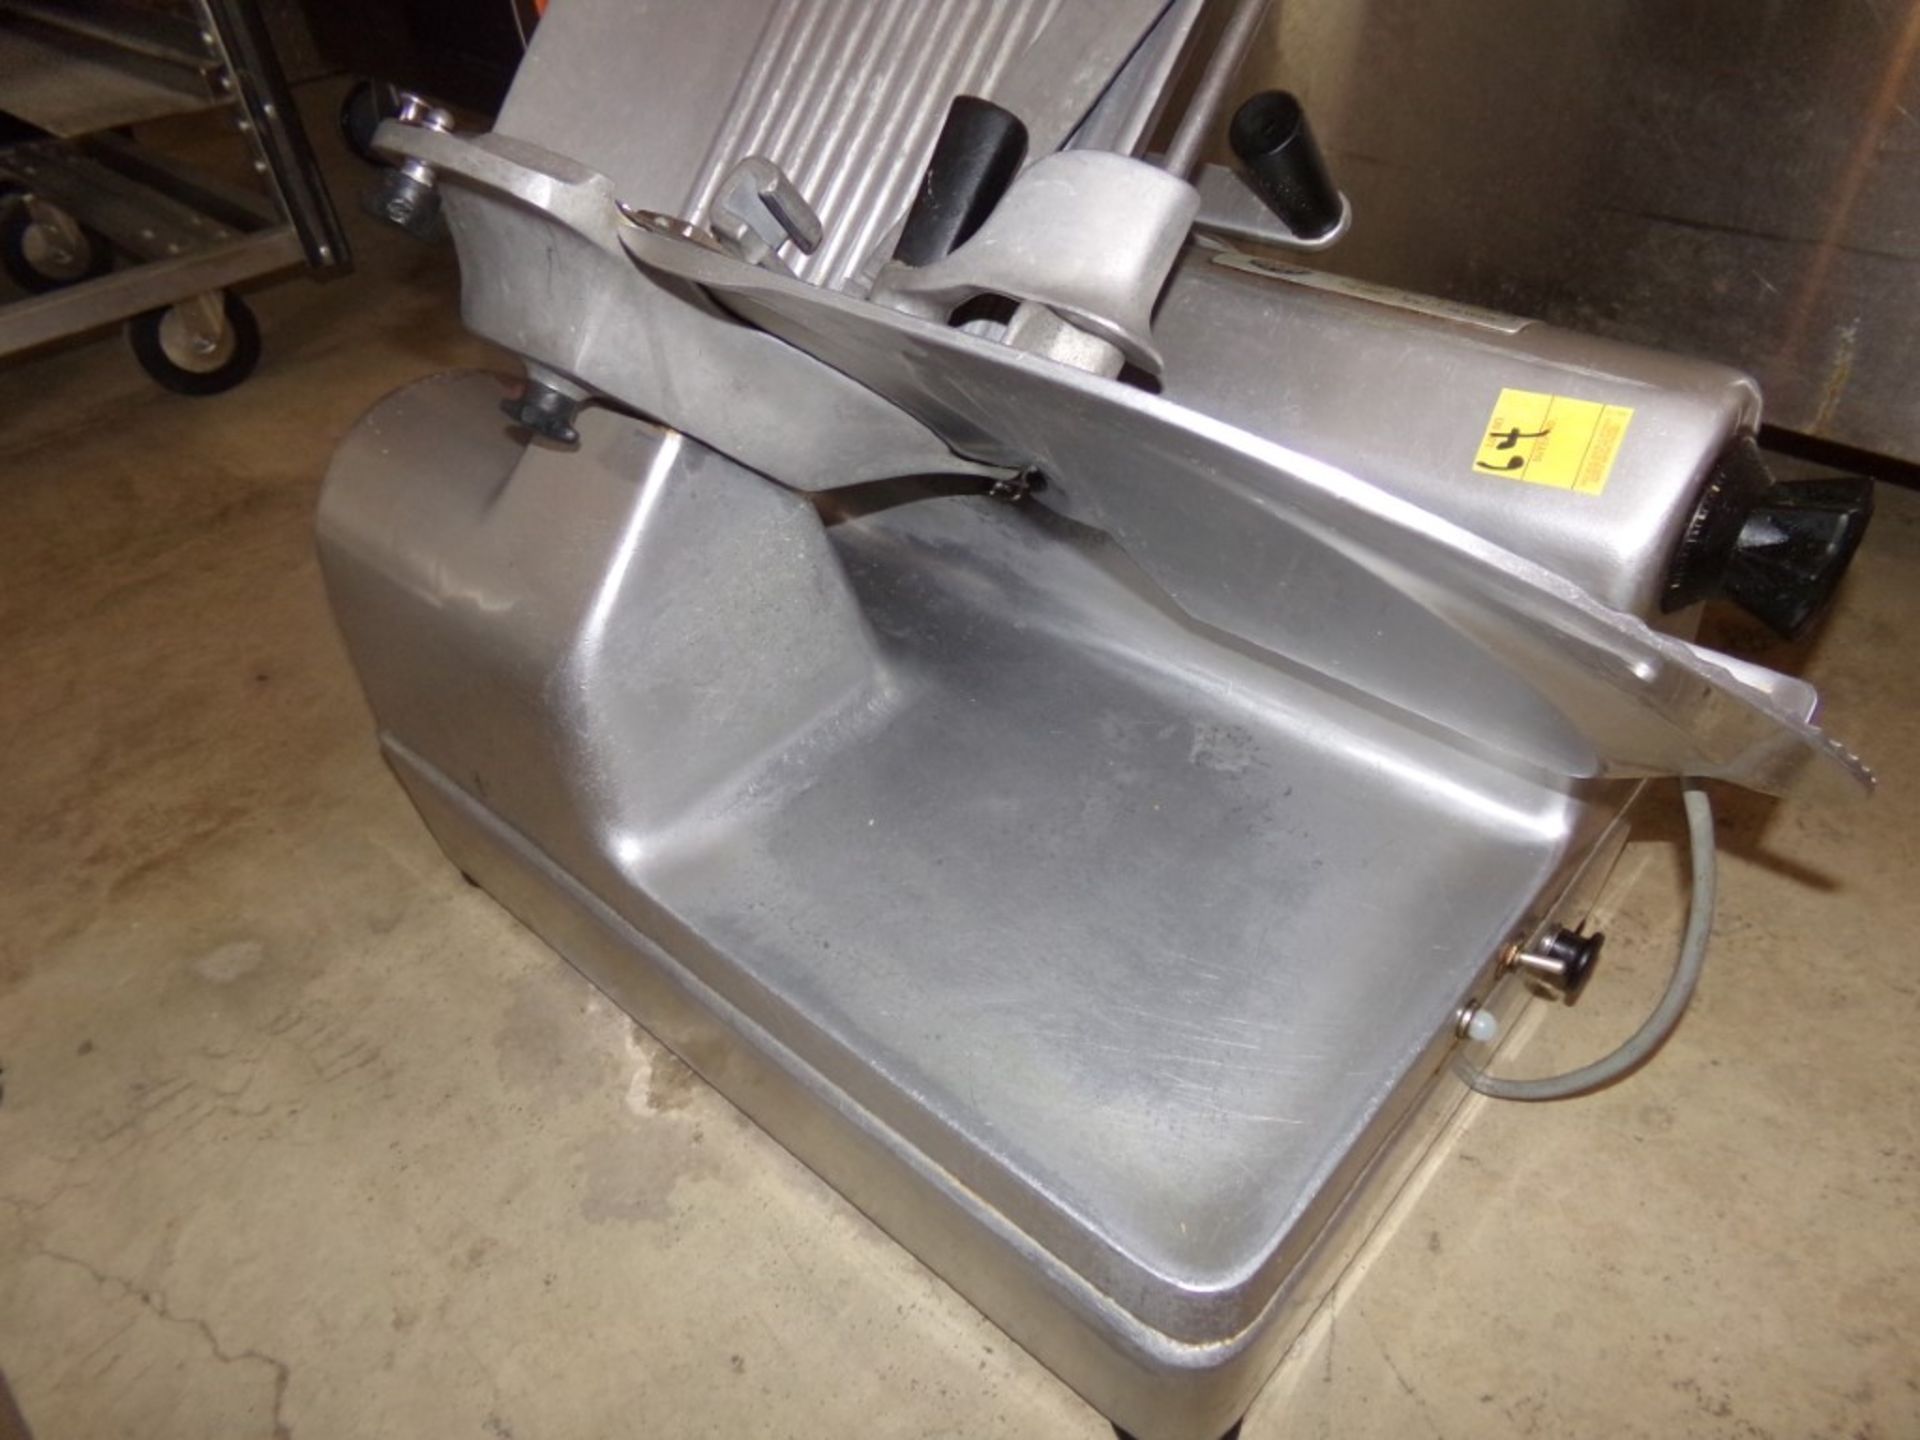 Hobart 8065 Stainless Steel Meat Slicer, Single Phase, From Local School - Image 2 of 3